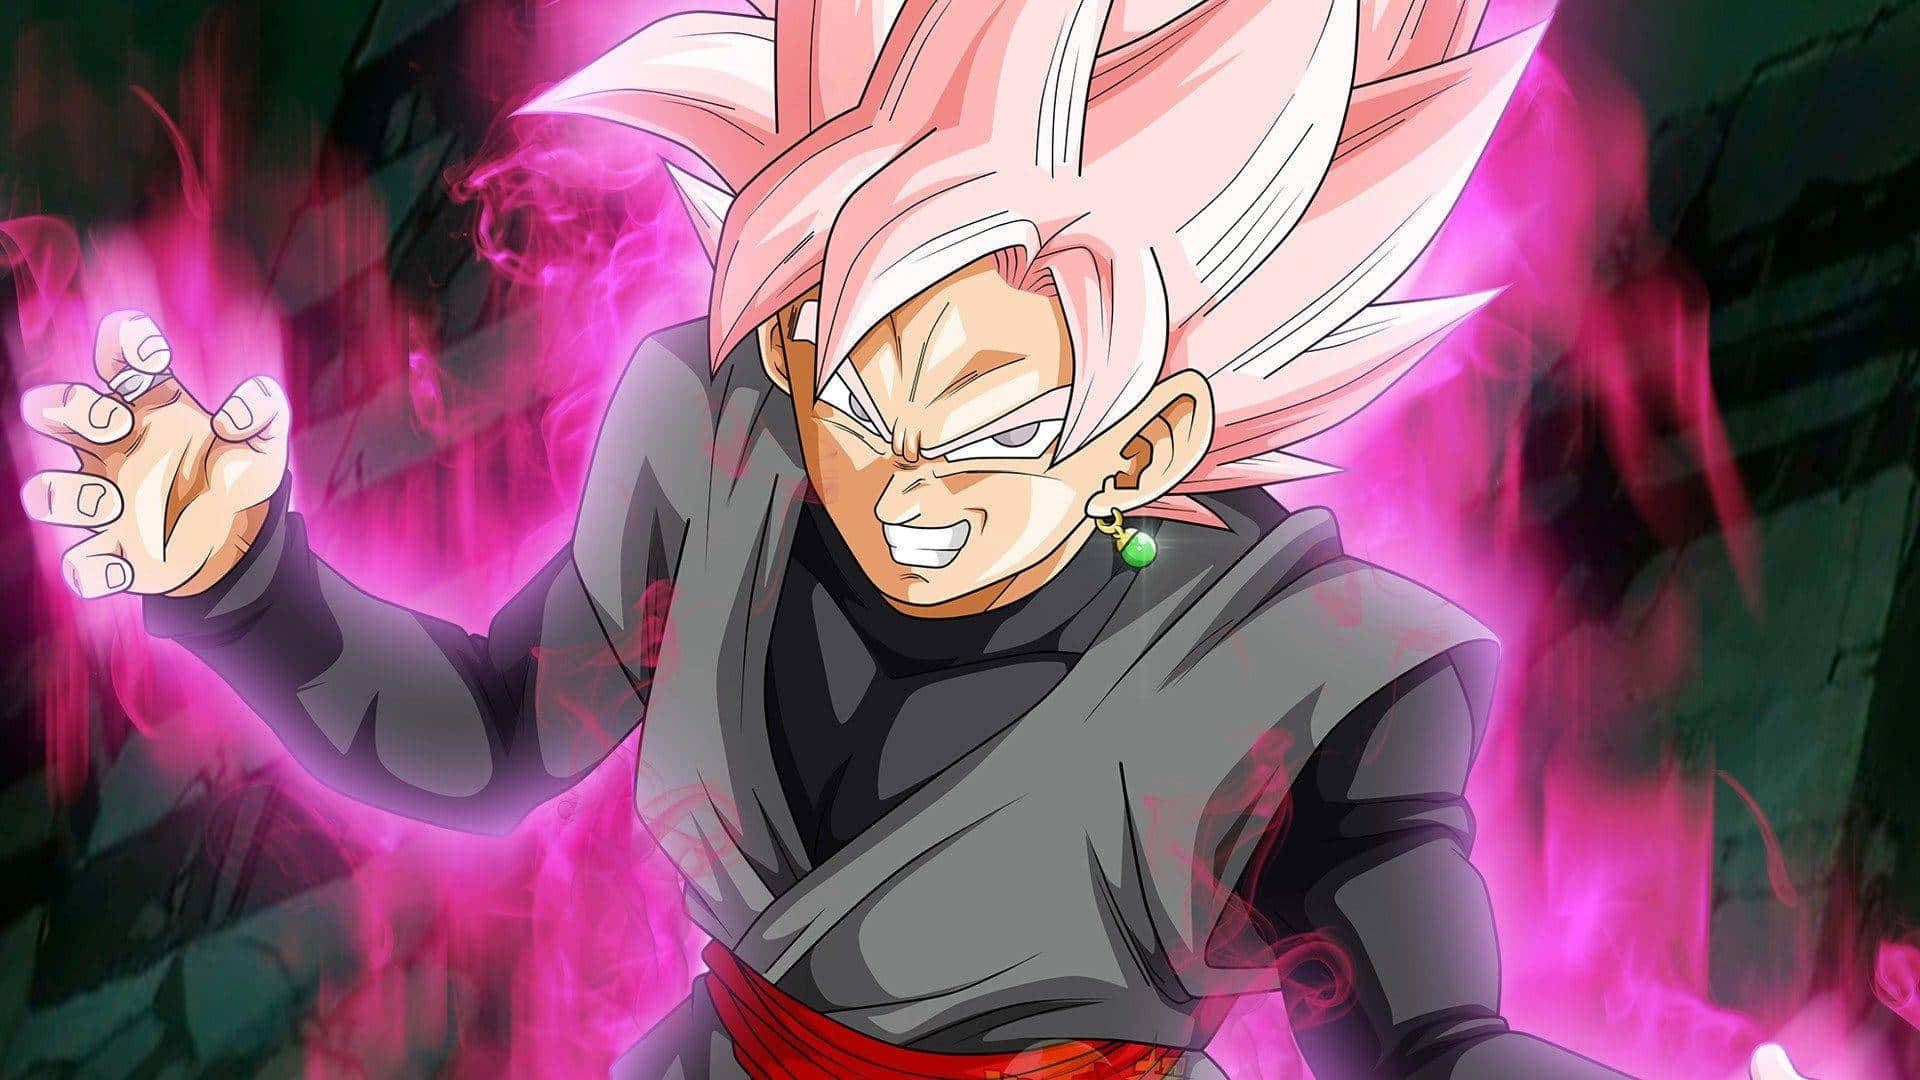 "An angry expression on the face of Goku, the main character of the popular anime Dragon Ball Z." Wallpaper